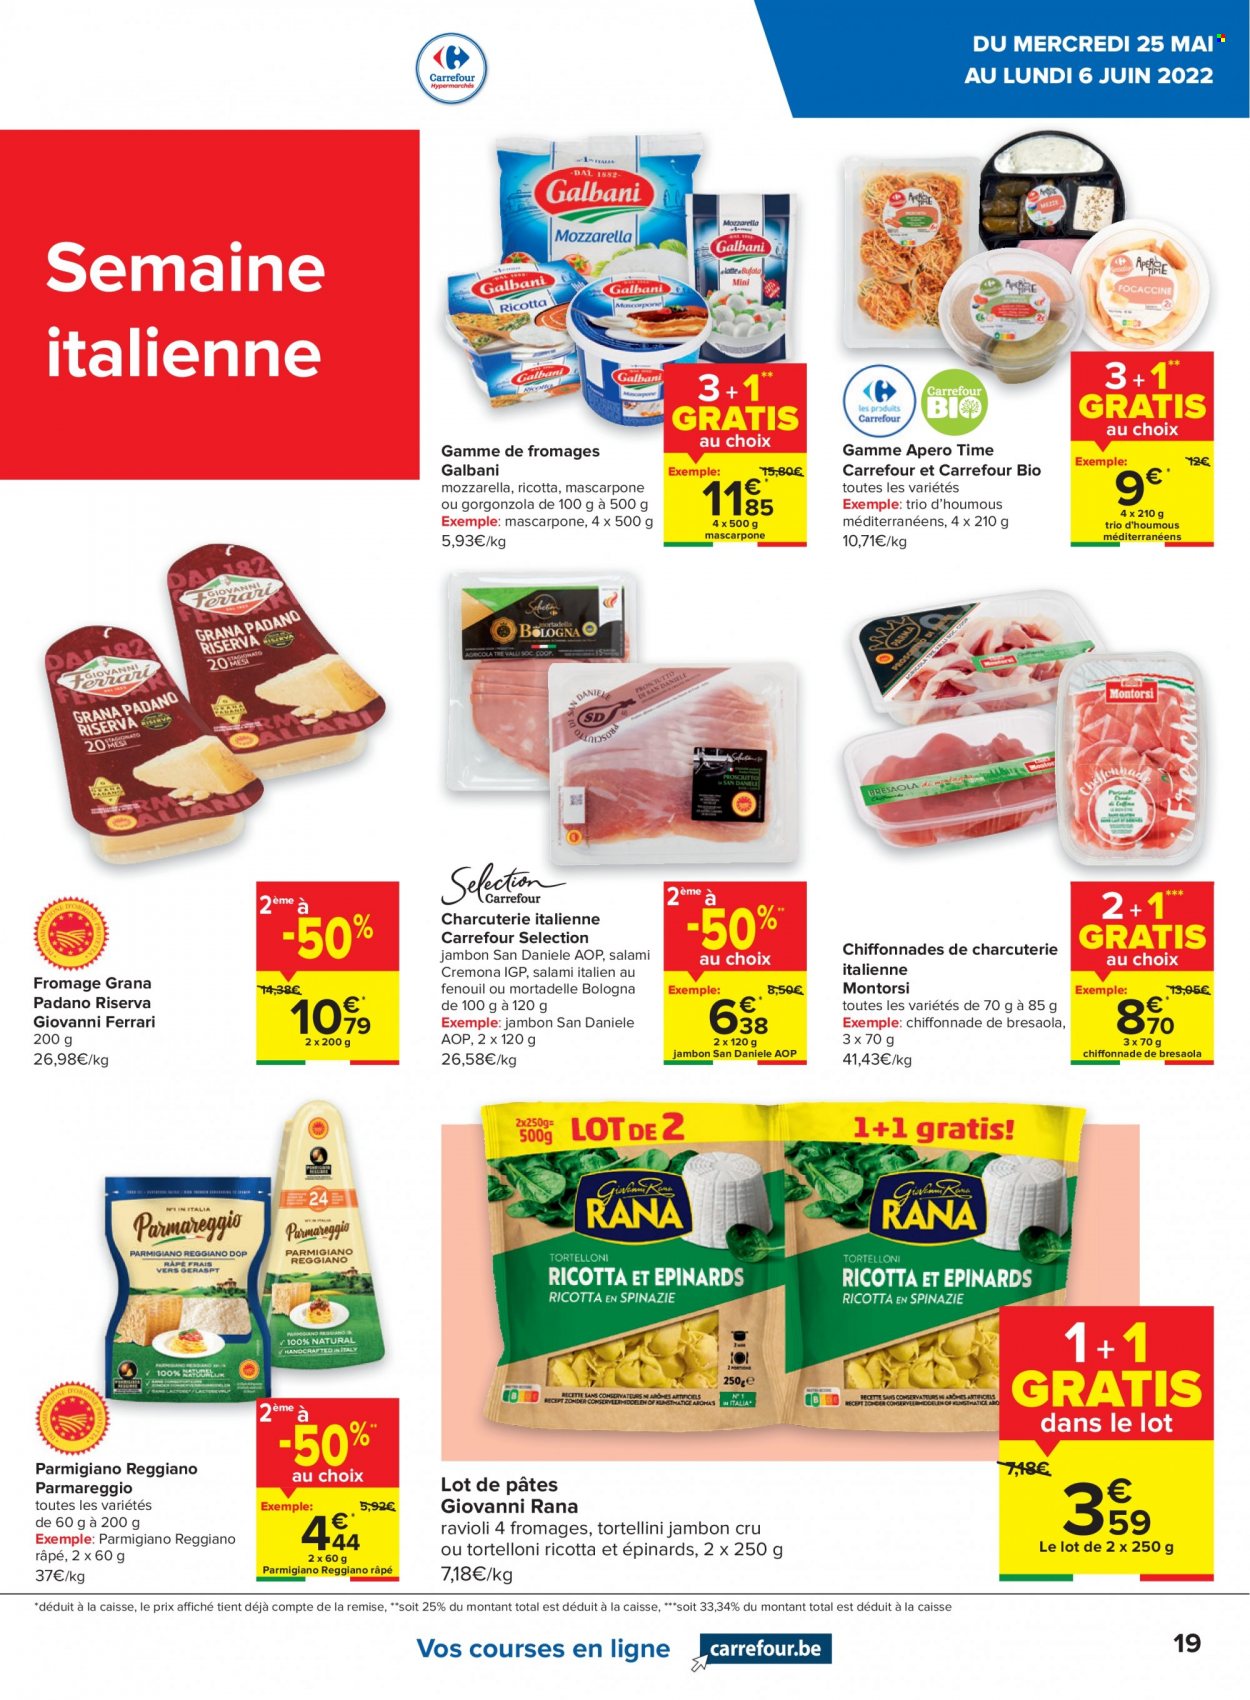 Catalogue Carrefour hypermarkt - 25.5.2022 - 31.5.2022. Page 19.